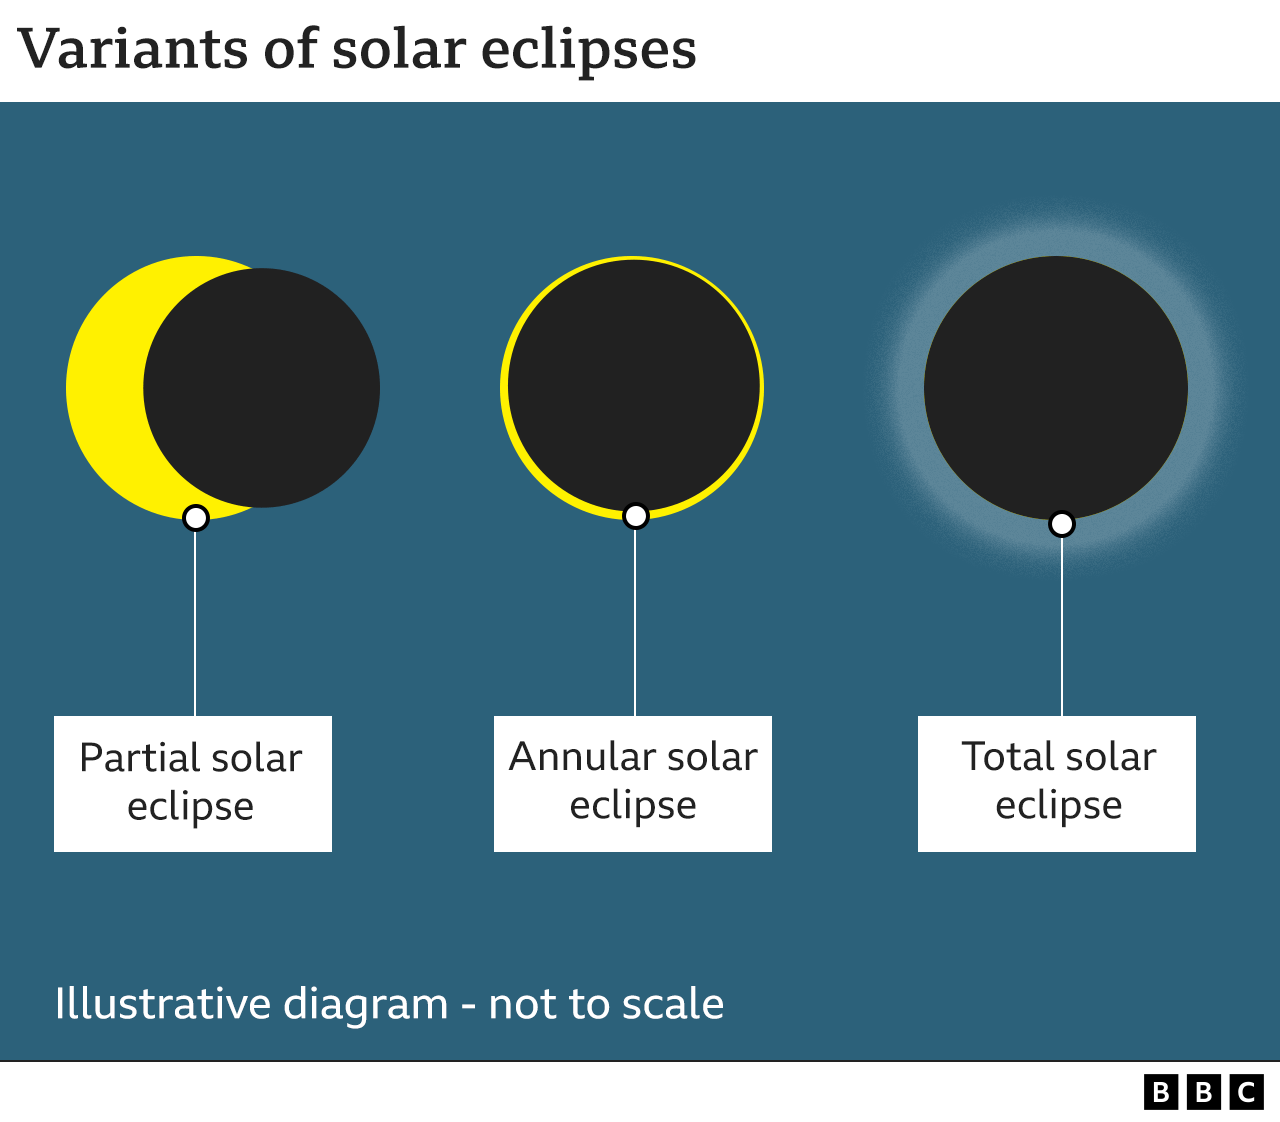 An infographic showing the difference between a partial, annular and total solar eclipse, based on the amount of the visible sun covered by the moon, ranging from a partial, to almost full and a total eclipse respectively.